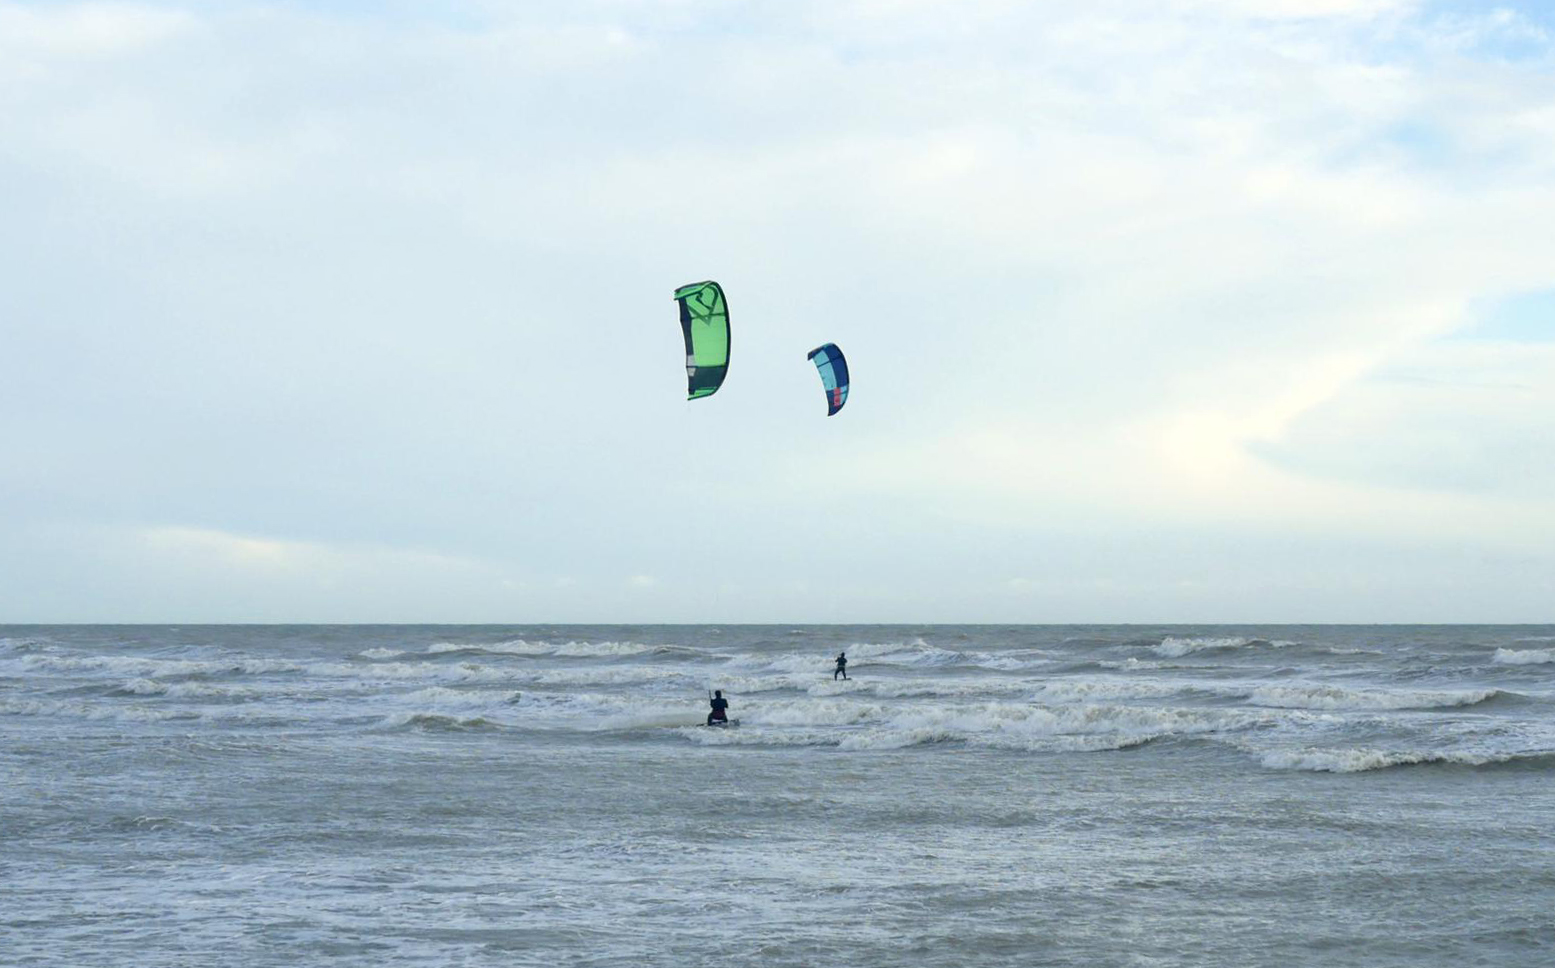 Two kitesurfers riding at King Alfred in Hove, UK.